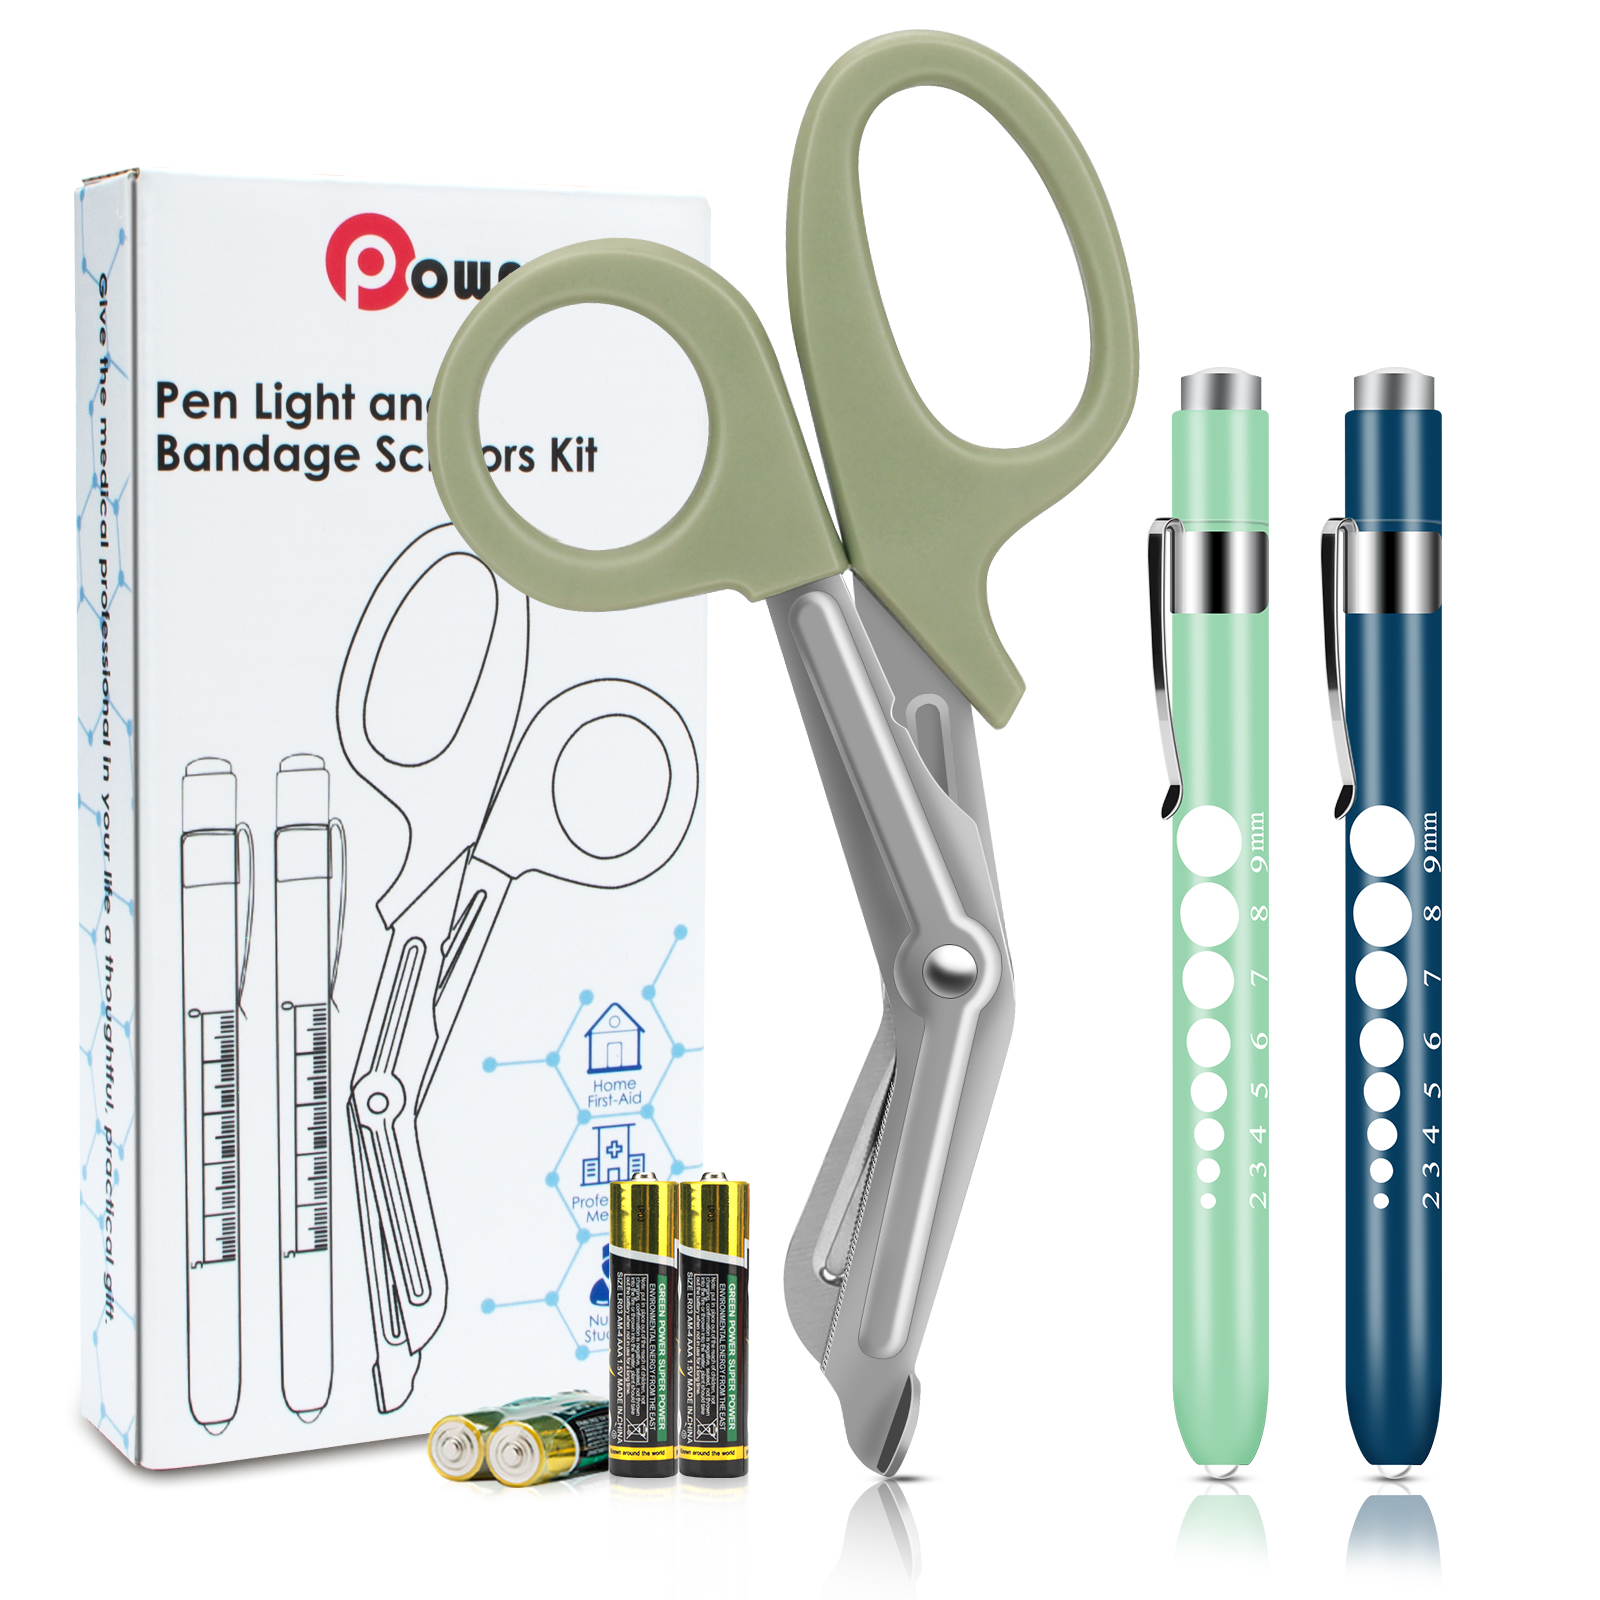 OPOWAY Medical Pen Light and Green Bandage Scissors 3 Pack, Two Reusable LED Pupil Penlight, with Free Batteries